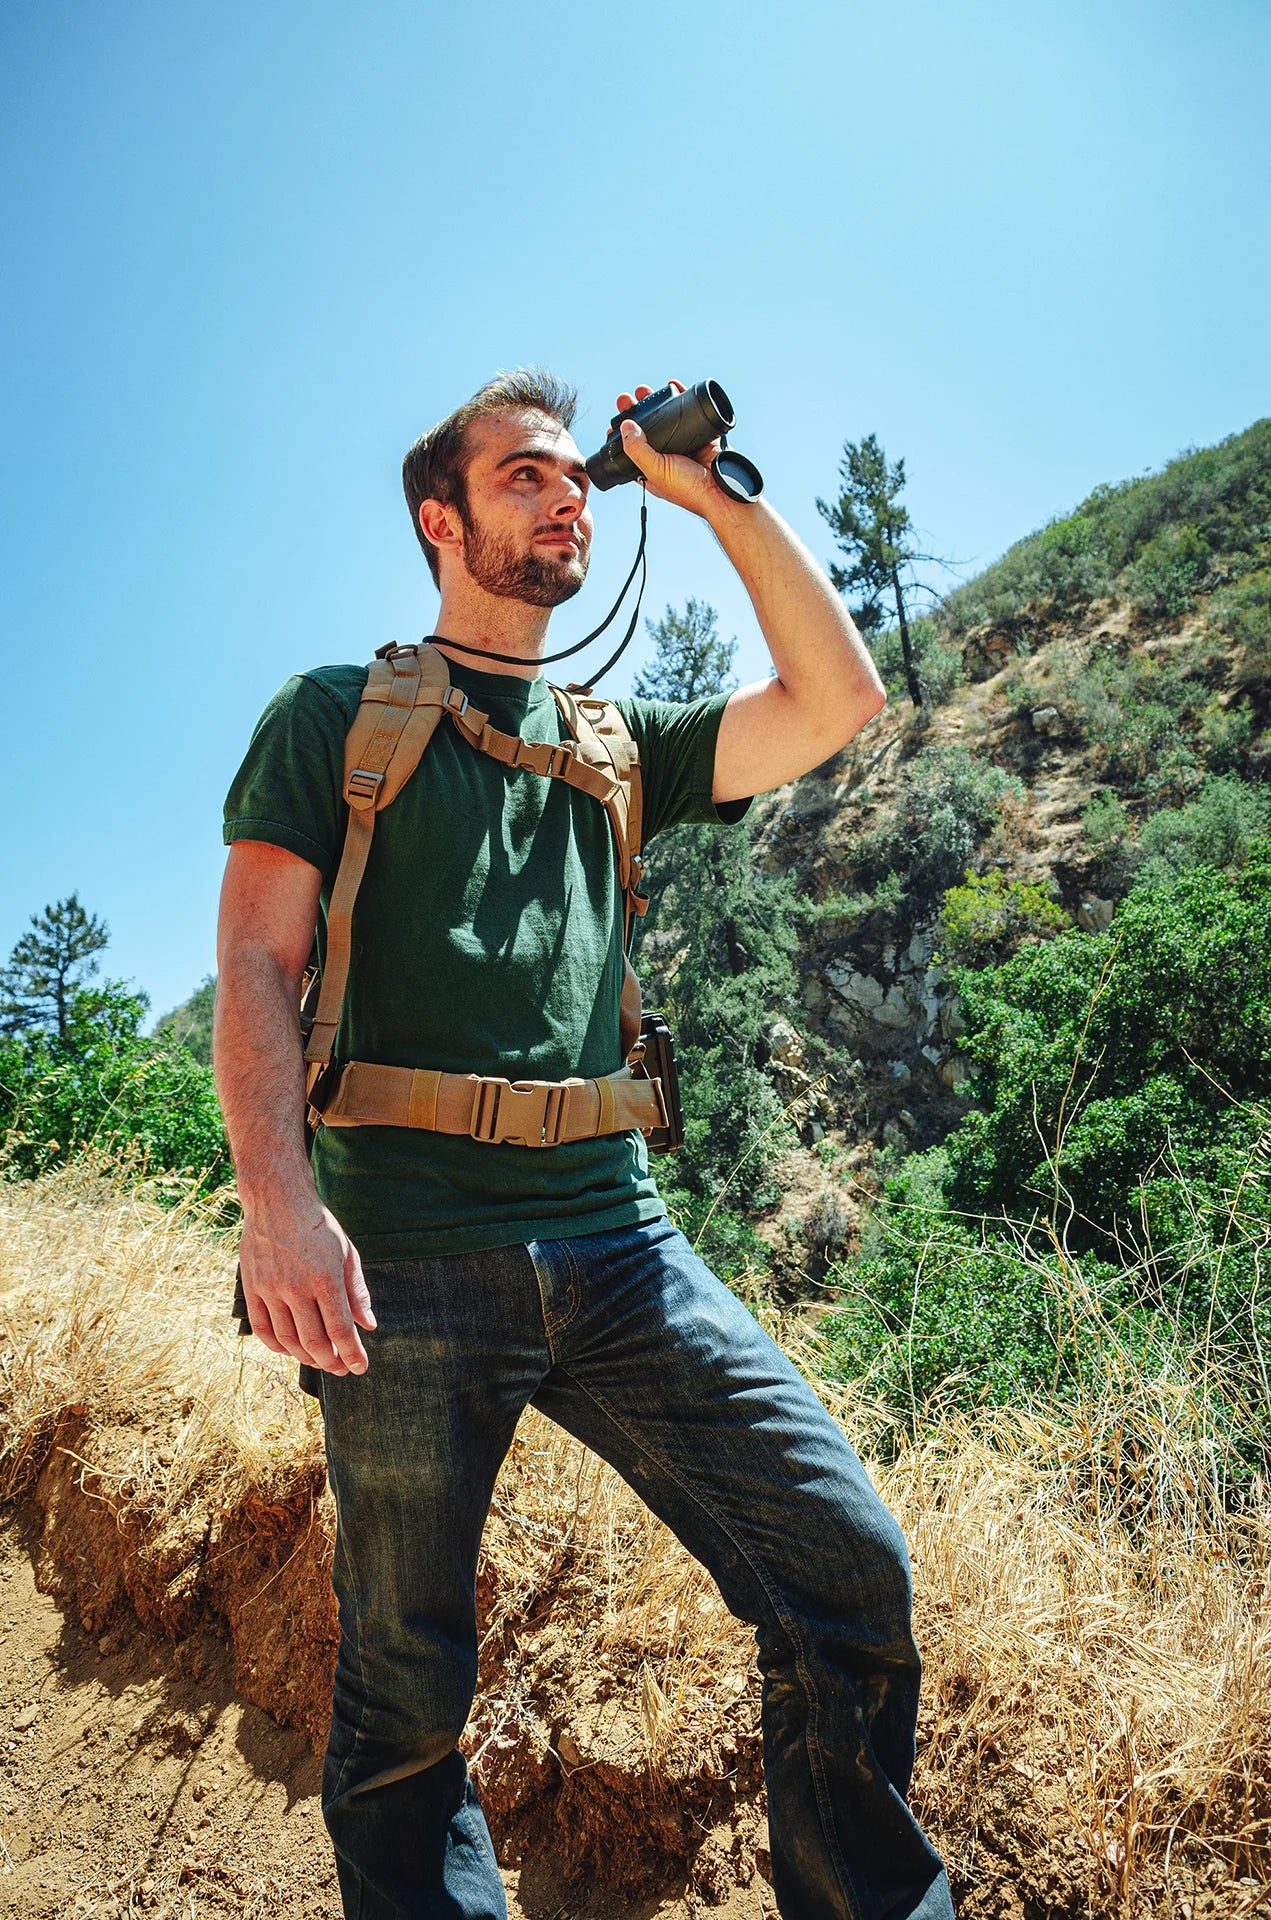 High-Quality Barska Monoculars | Explore our Monocular Collection Now